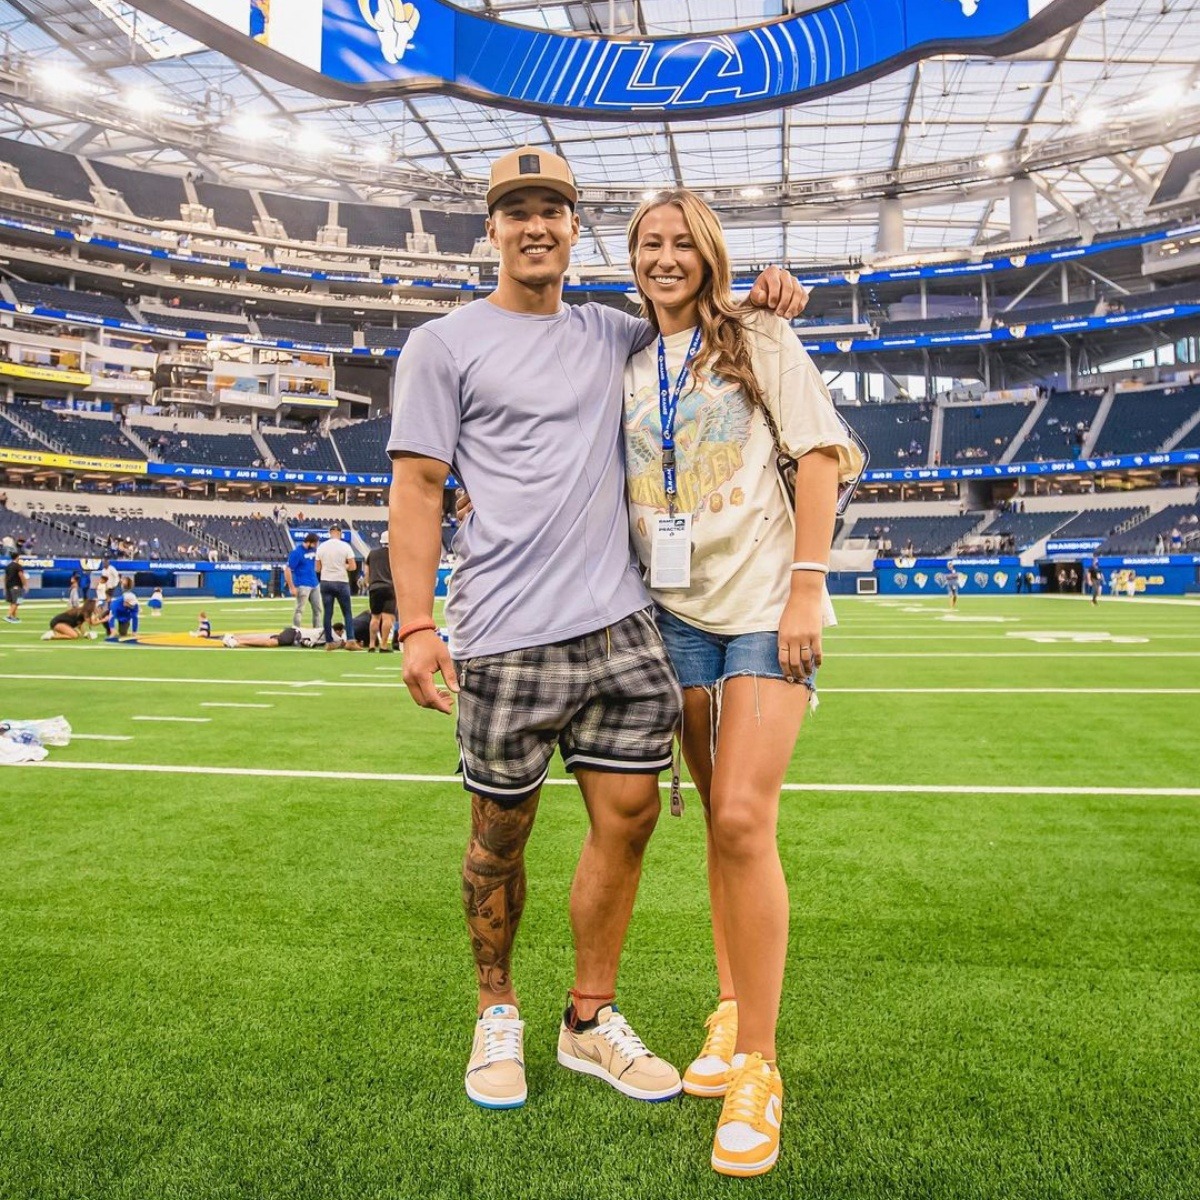 Rams safety Taylor Rapp proposes to high school sweetheart on